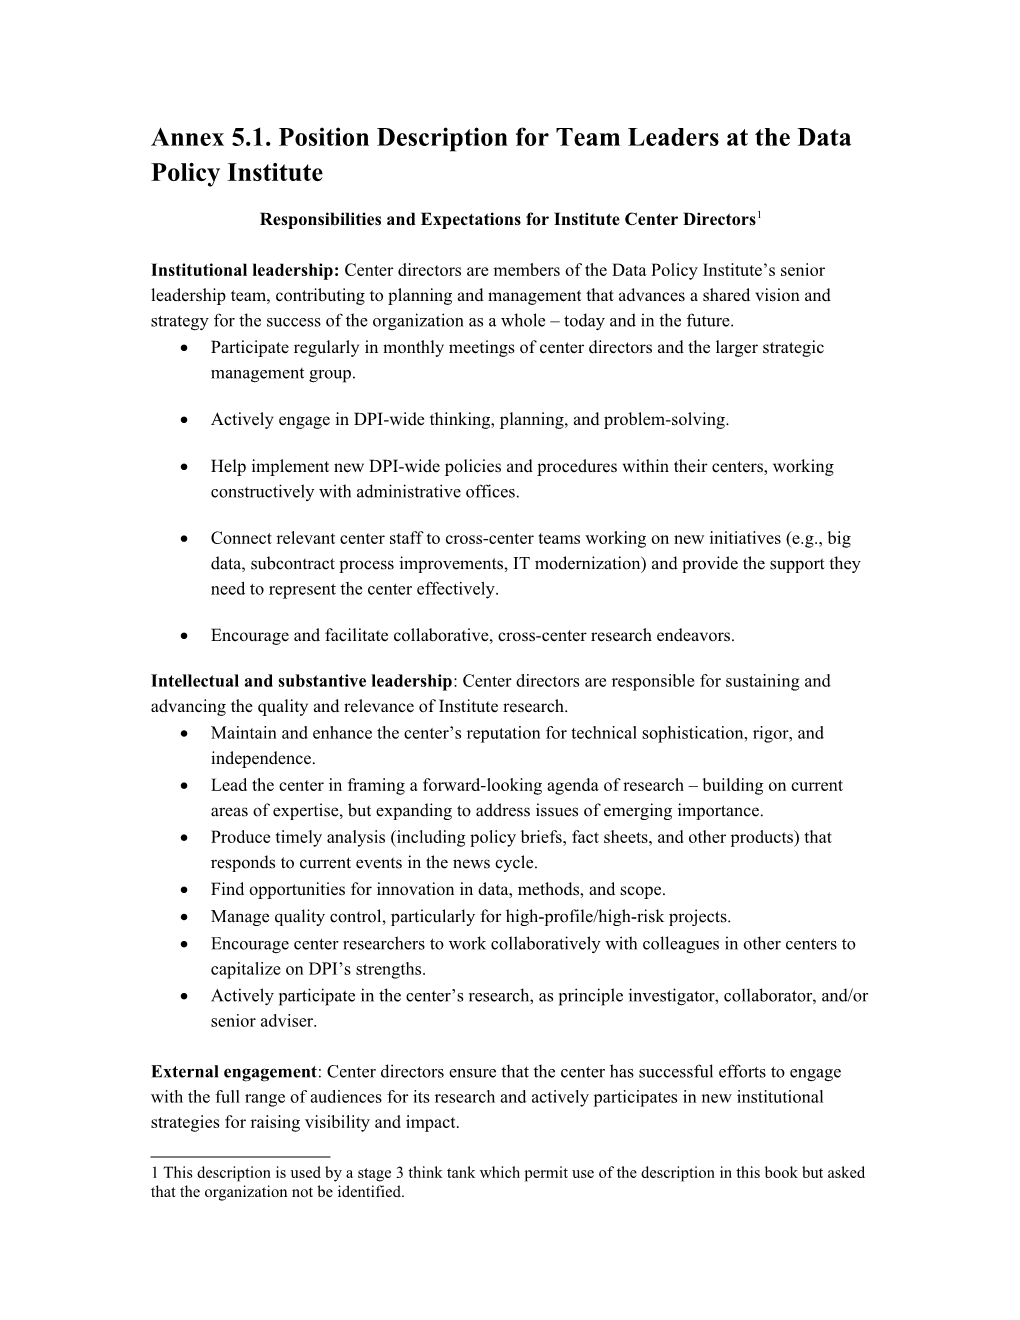 Annex 5.1. Position Description for Team Leaders at the Data Policy Institute